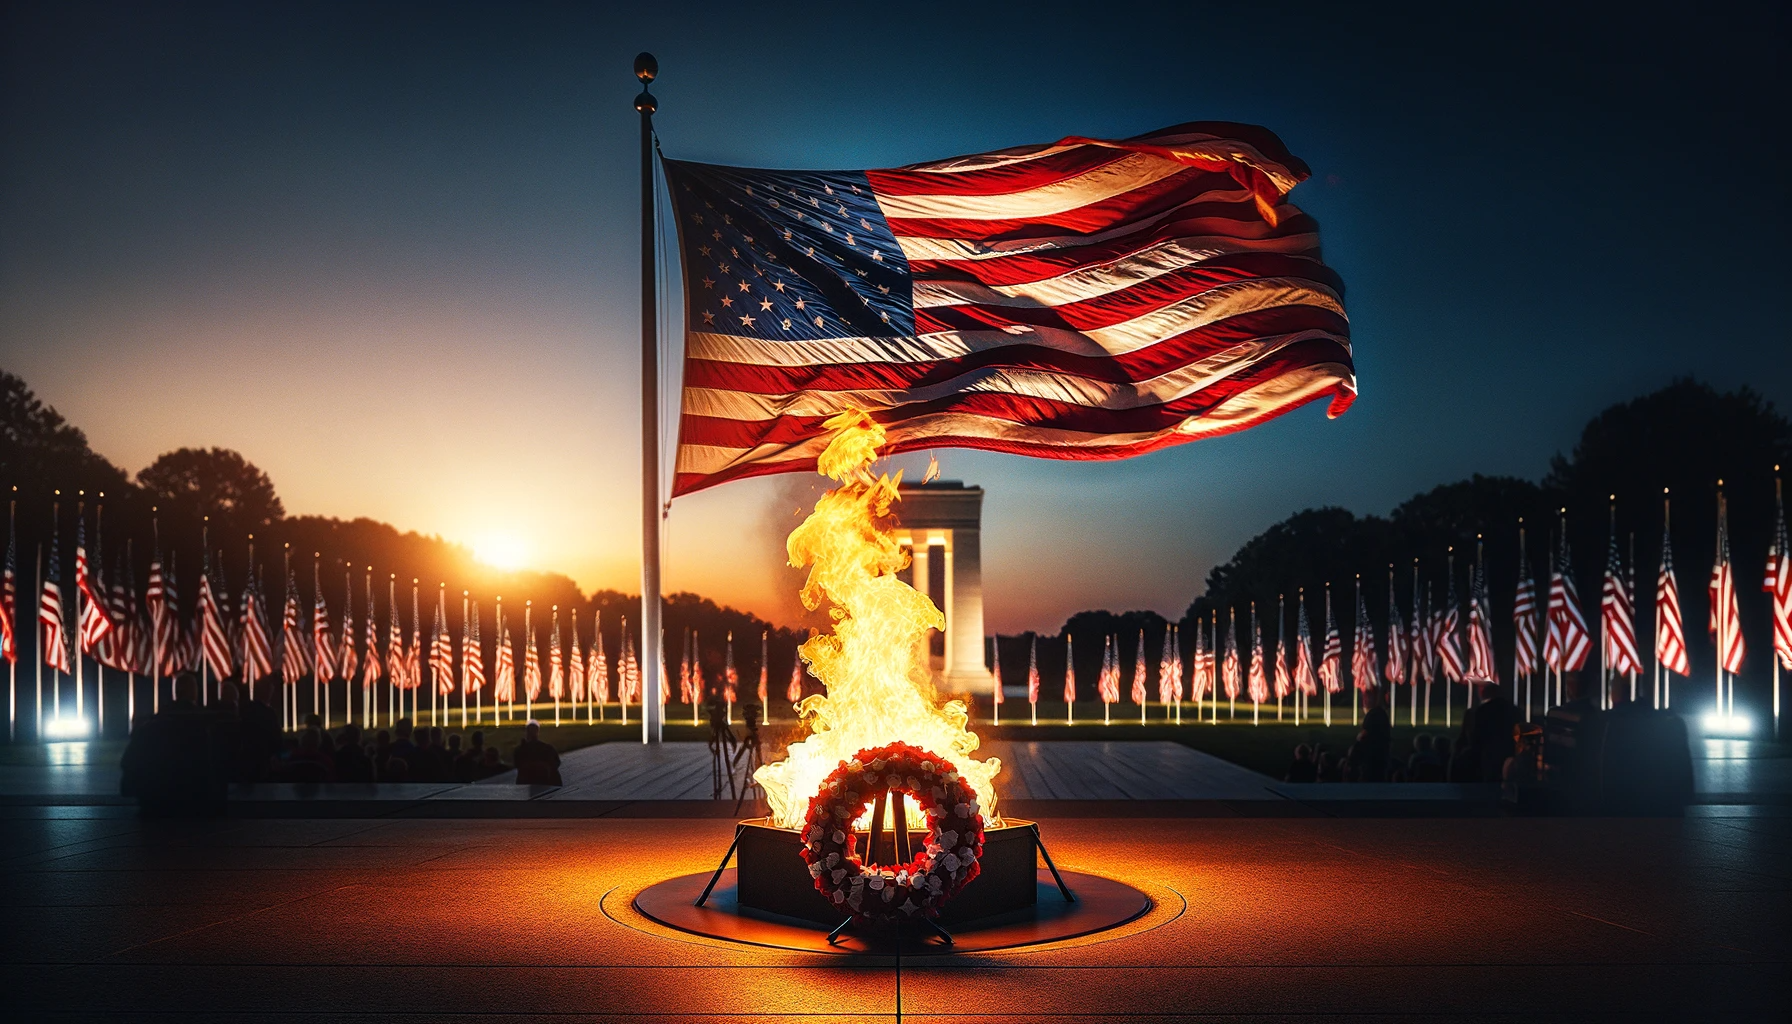 Is Burning the American Flag Illegal?